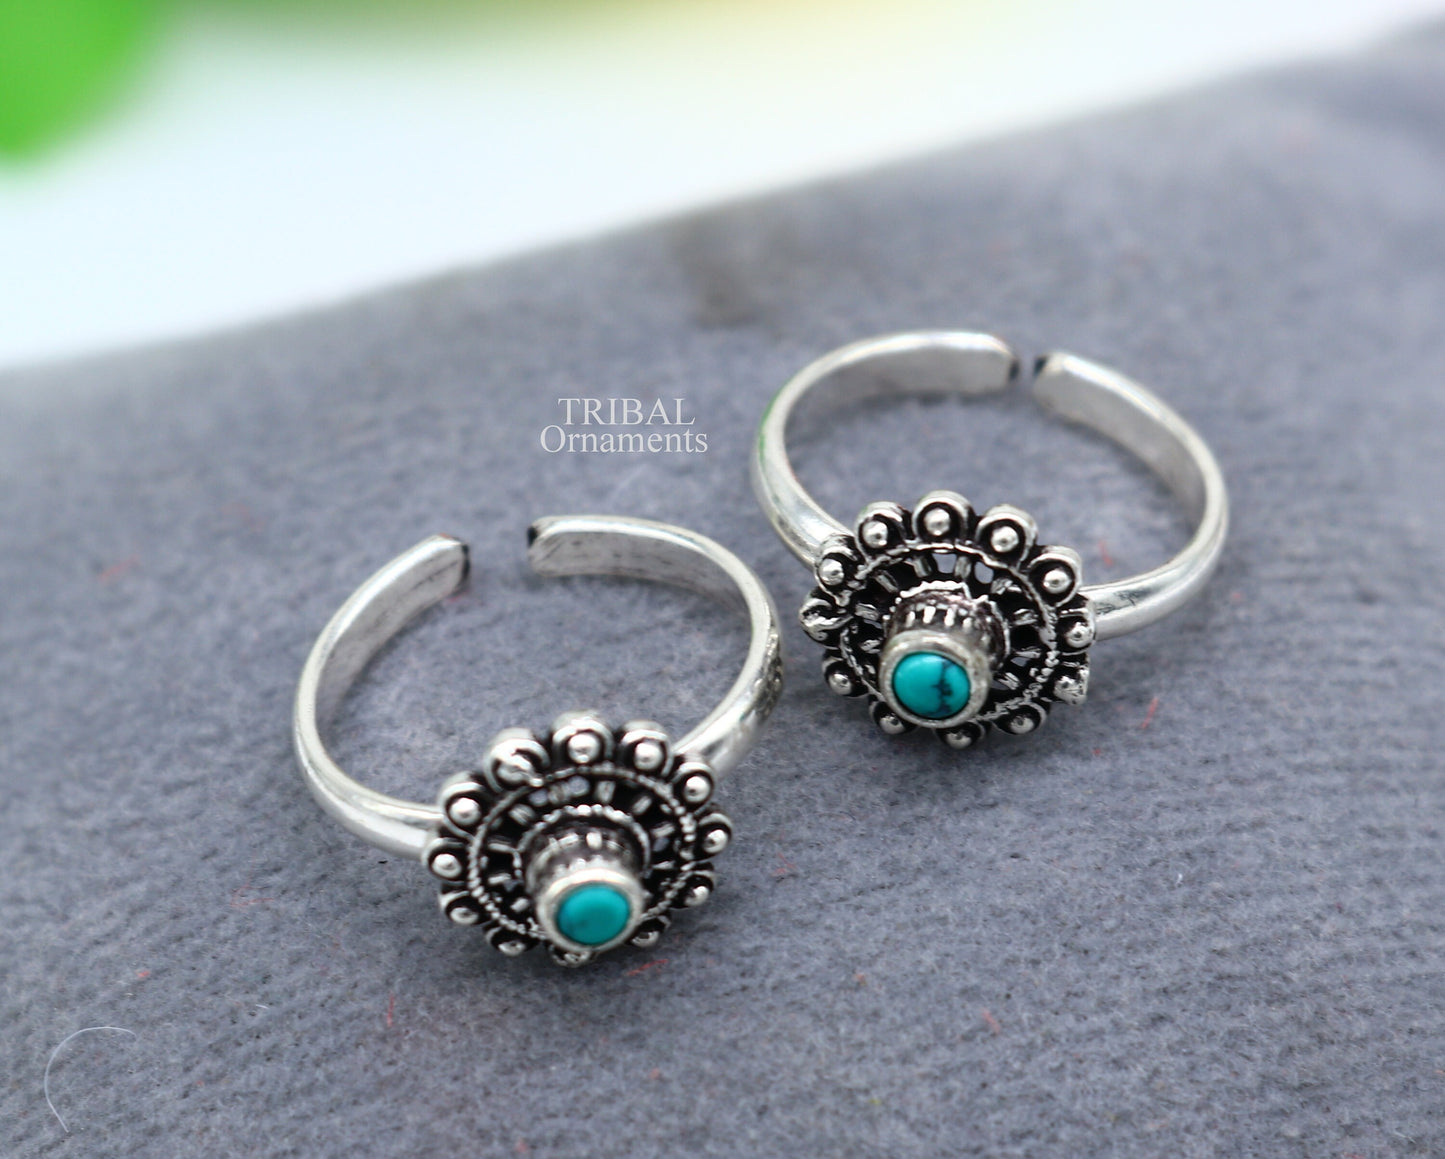 925 sterling silver handmade fabulous tiny toe ring band turquoise stone tribal belly dance vintage style ethnic jewelry from India toer146 - TRIBAL ORNAMENTS